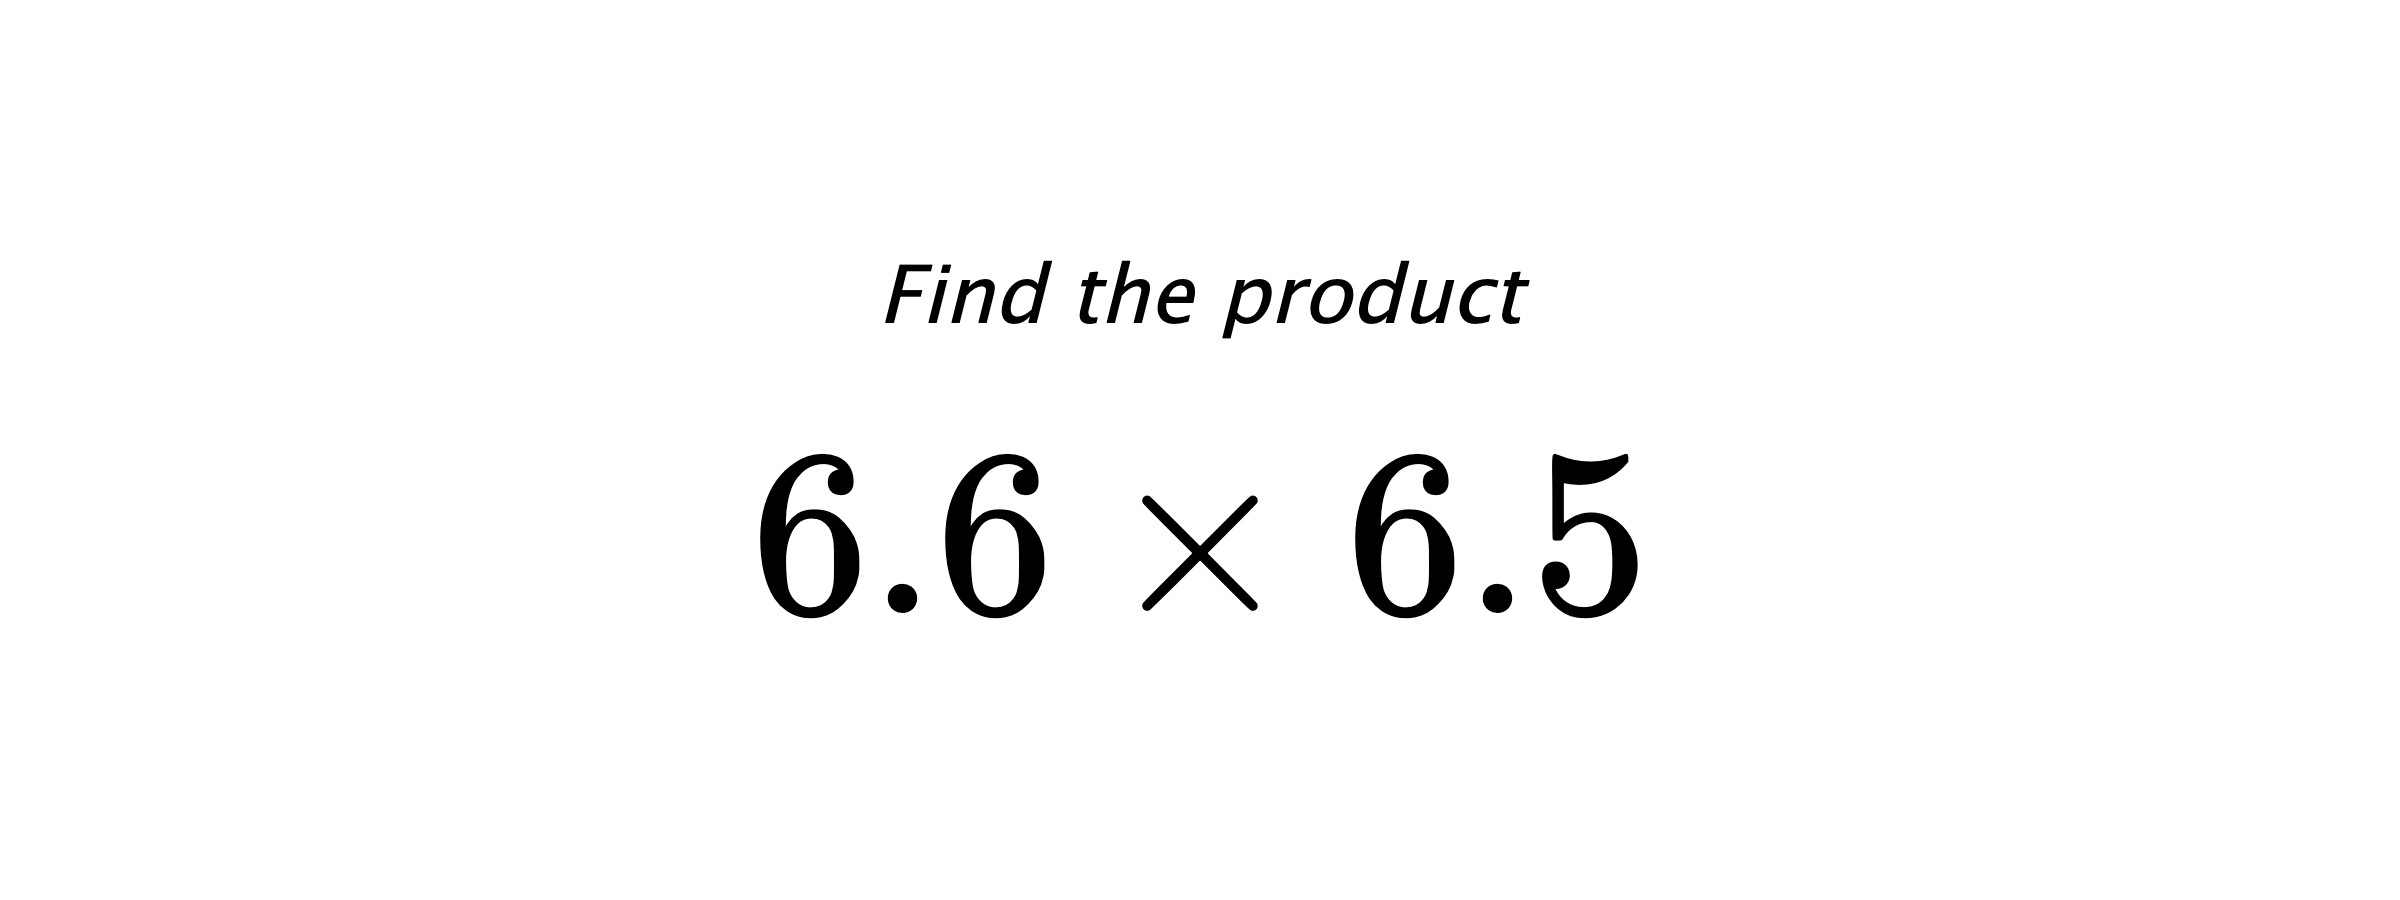 Find the product $ 6.6 \times 6.5 $